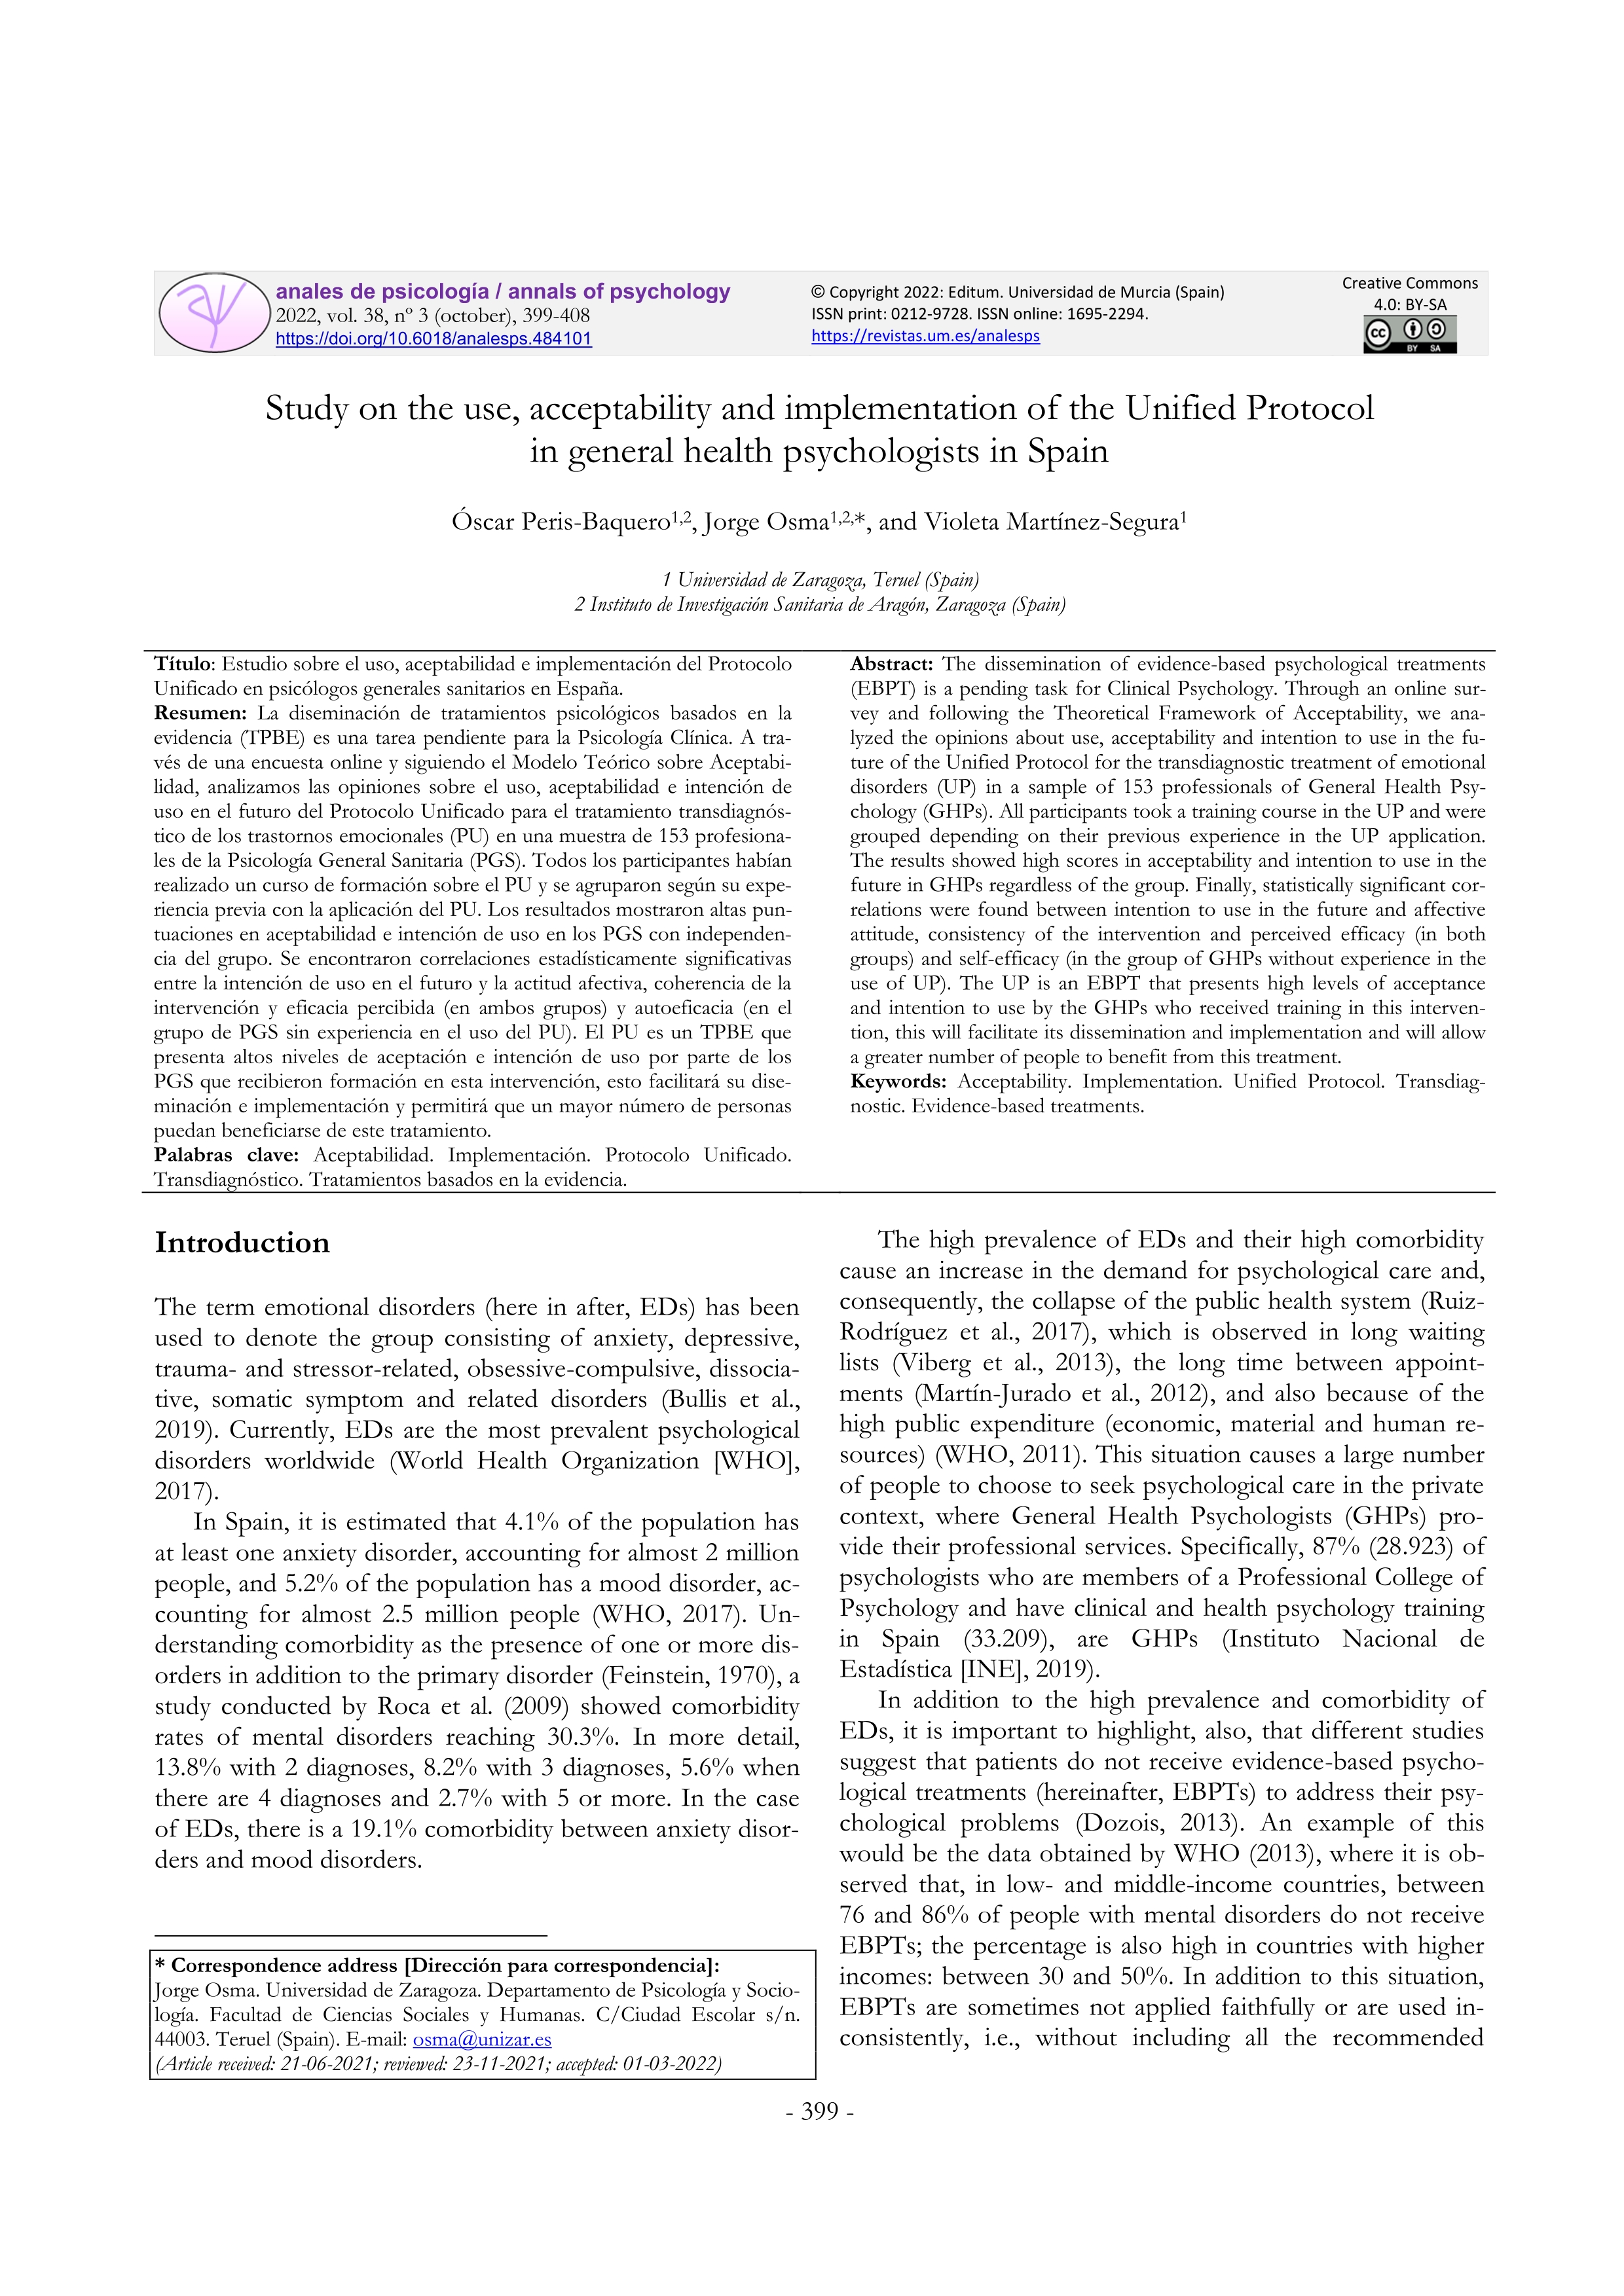 Study on the use, acceptability and implementation of the Unified Protocol in general health psychologists in Spain